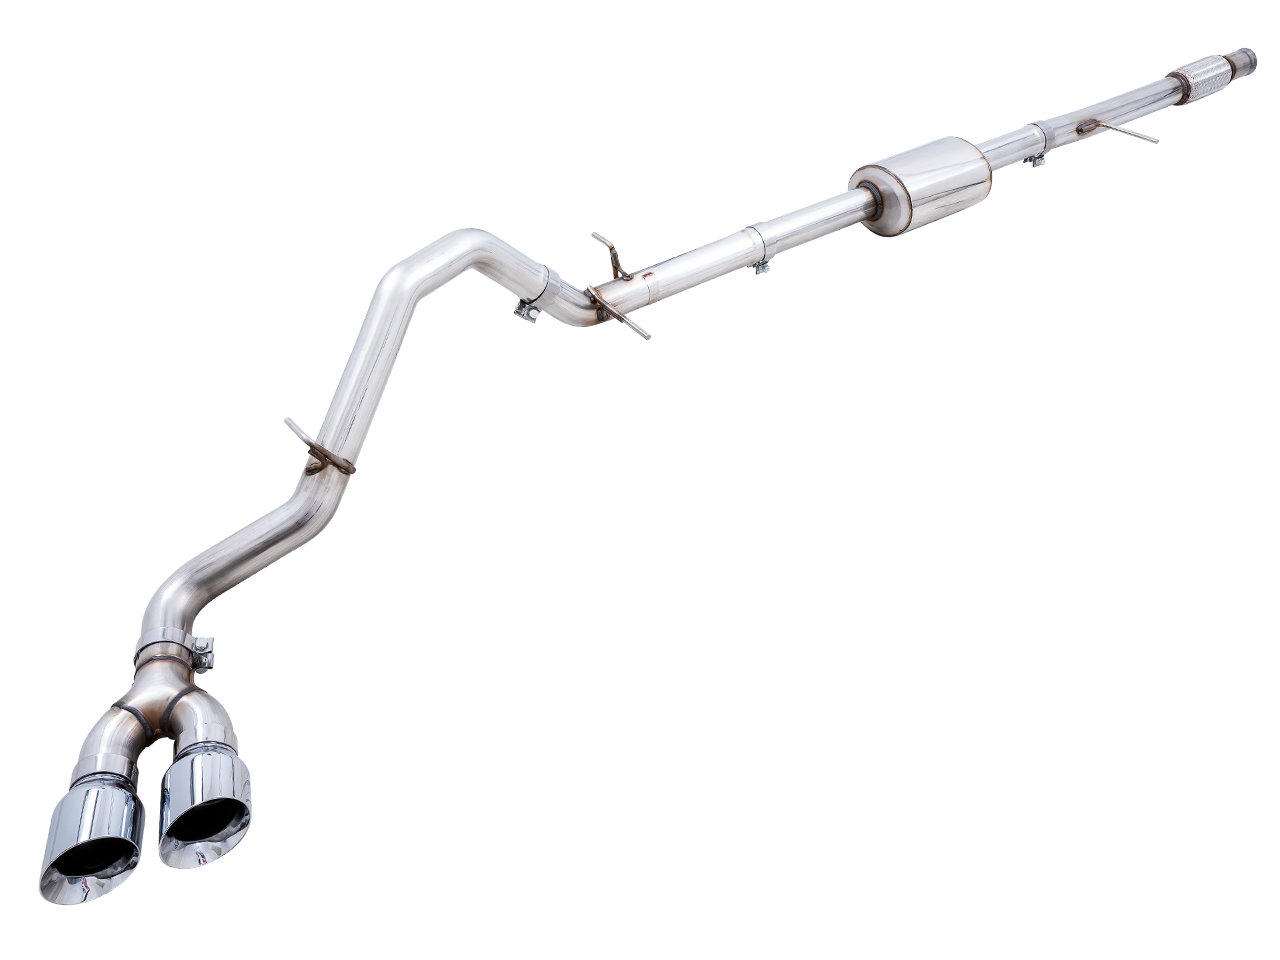 AWE 0FG Exhaust Suite for the 4th Gen Silverado/Sierra 5.3L - AWE